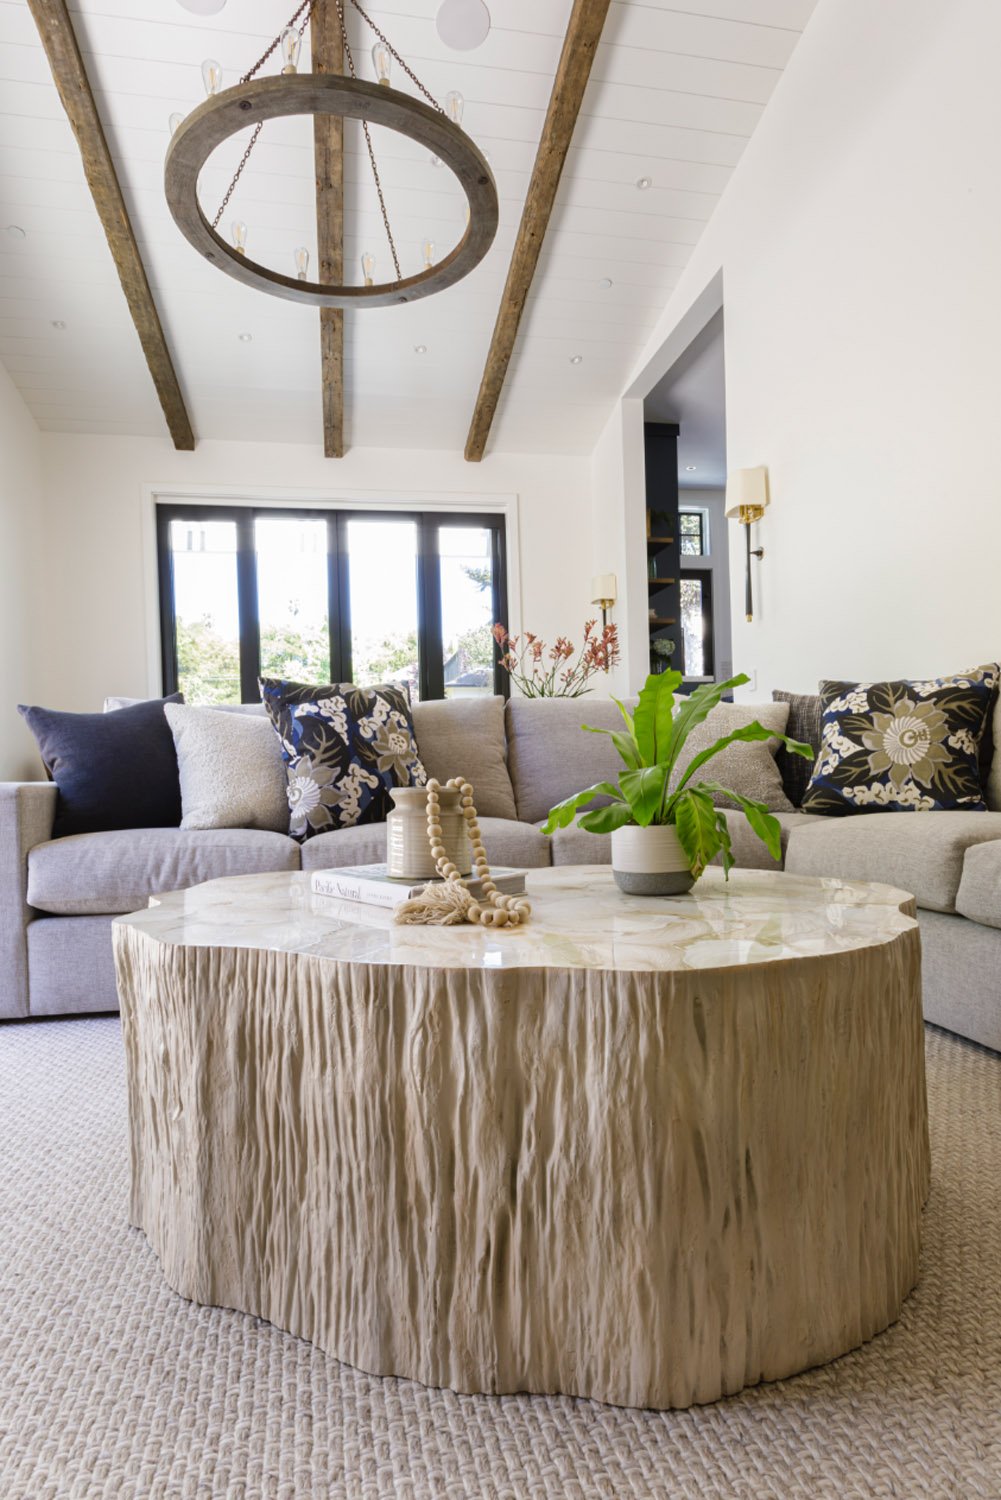 Natural wooden coffee table and wooden ceiling beams.jpg